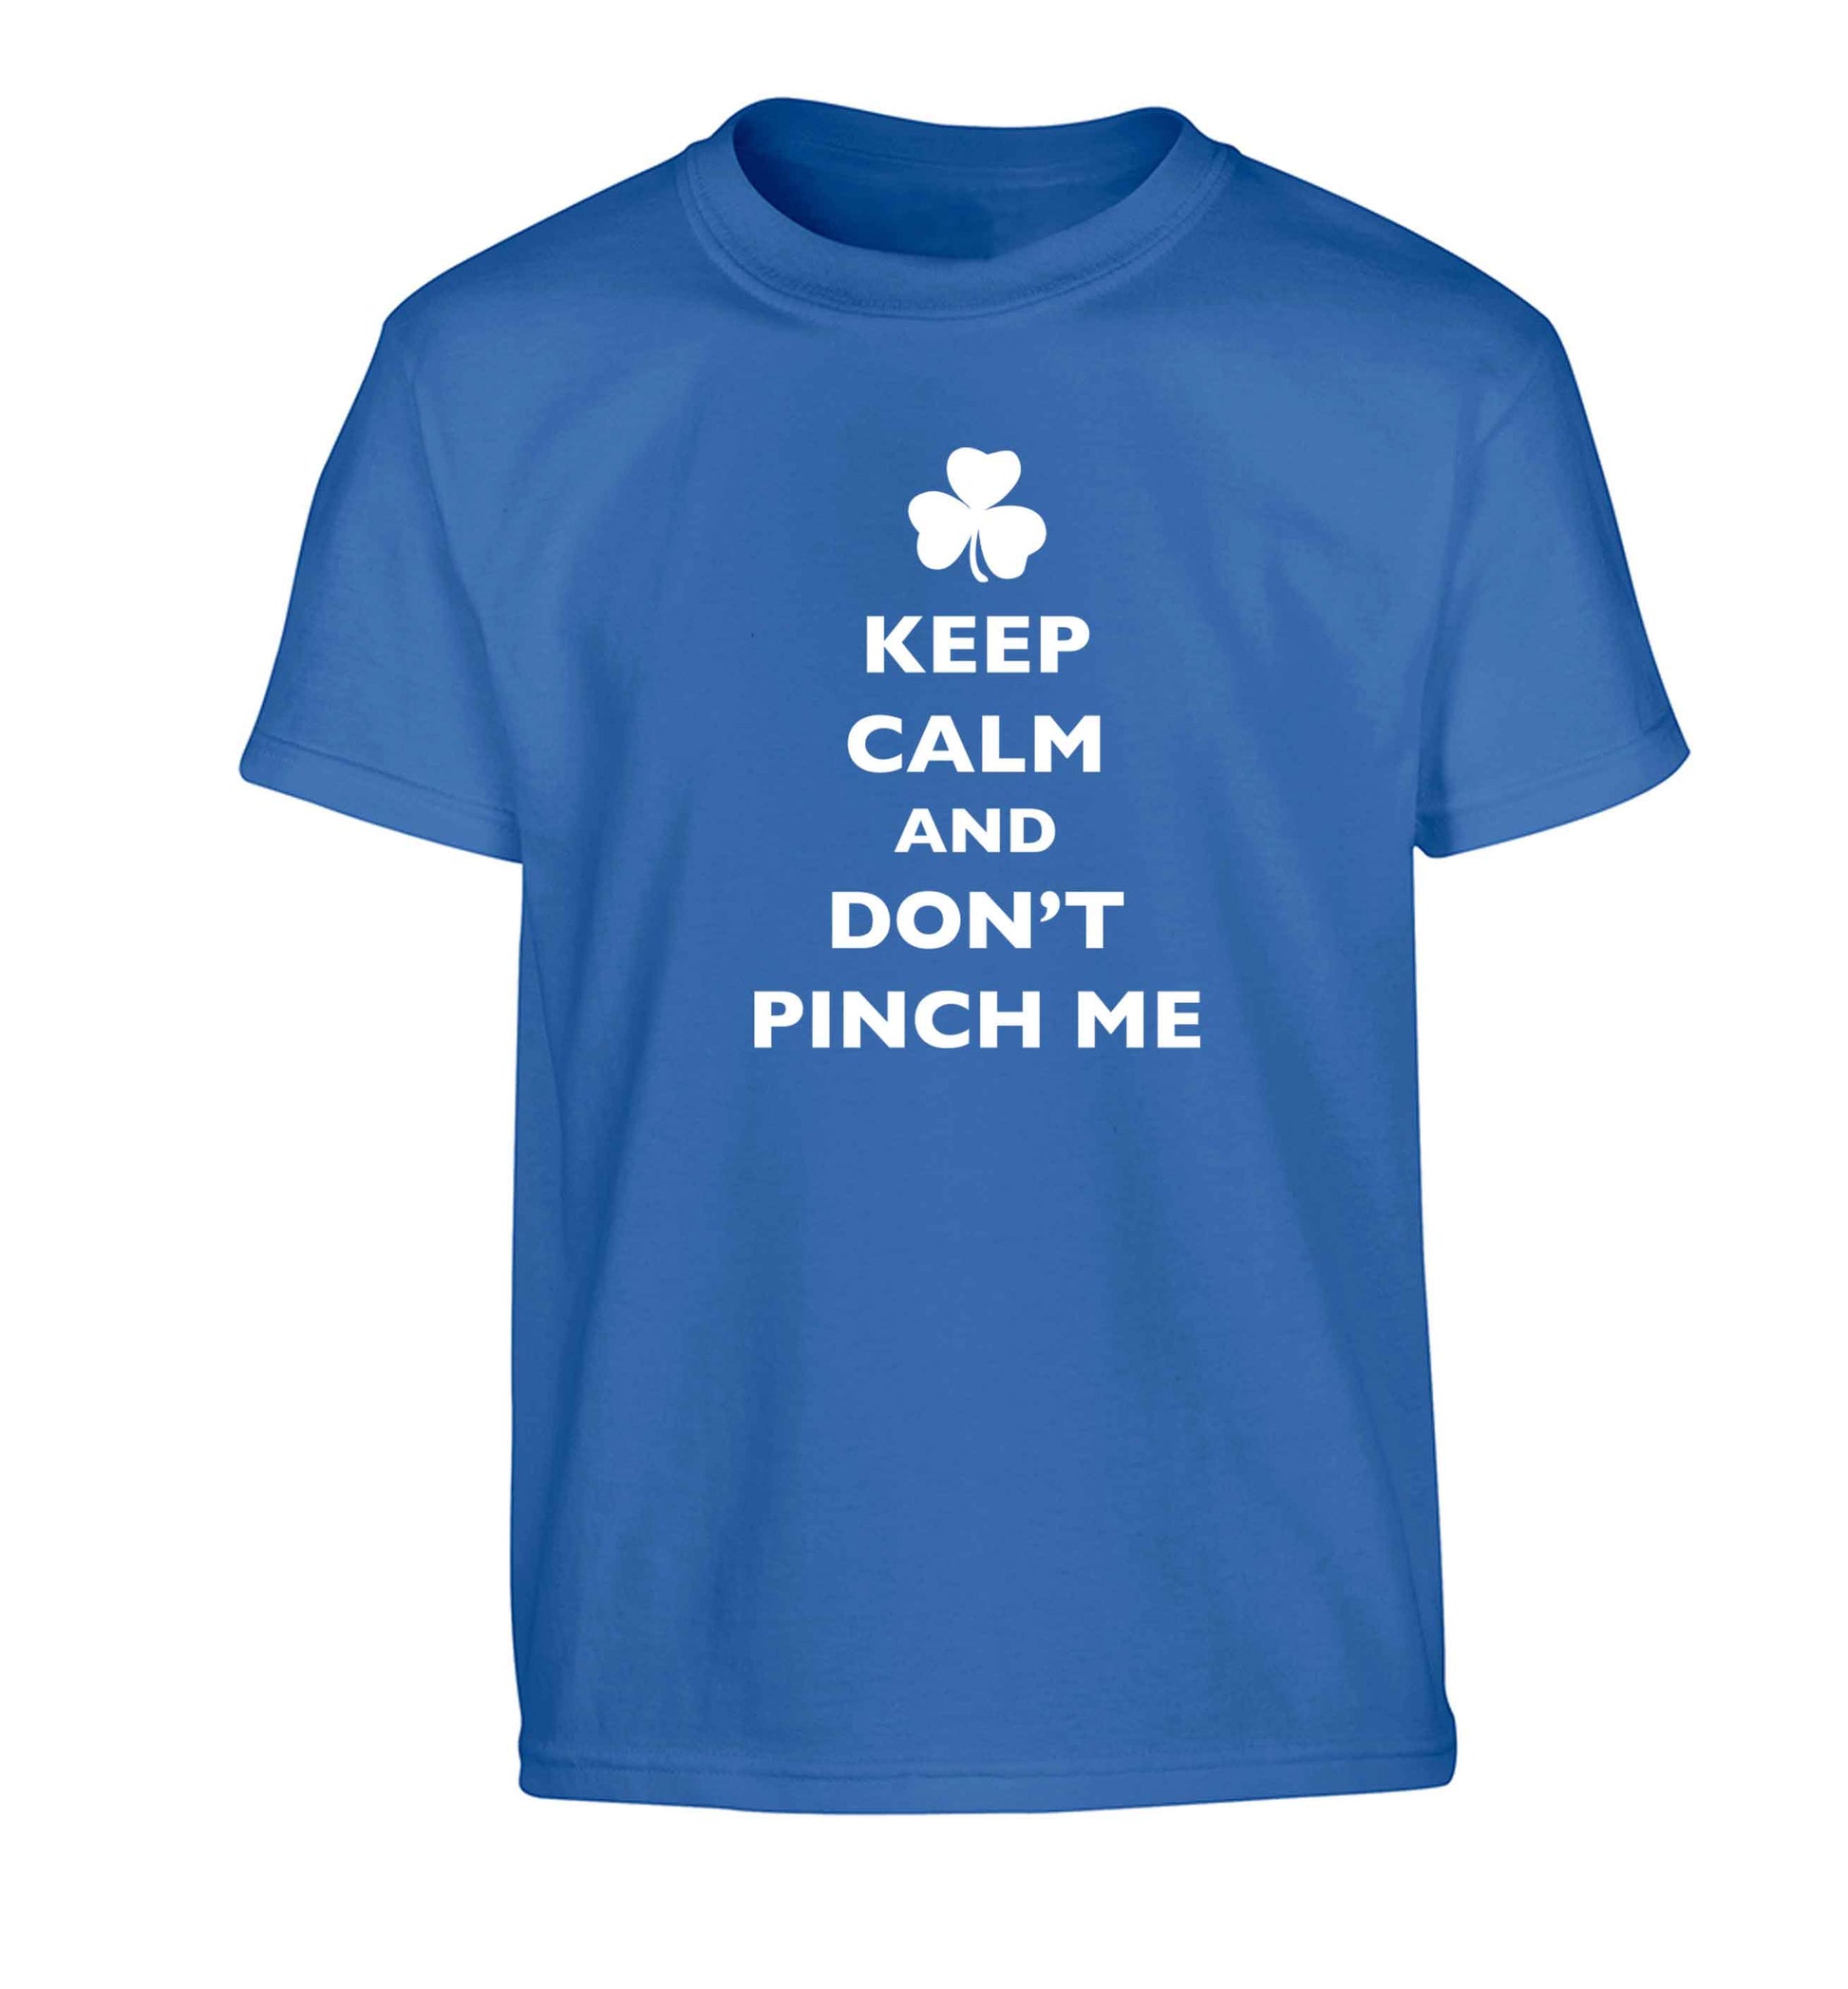 Keep calm and don't pinch me Children's blue Tshirt 12-13 Years